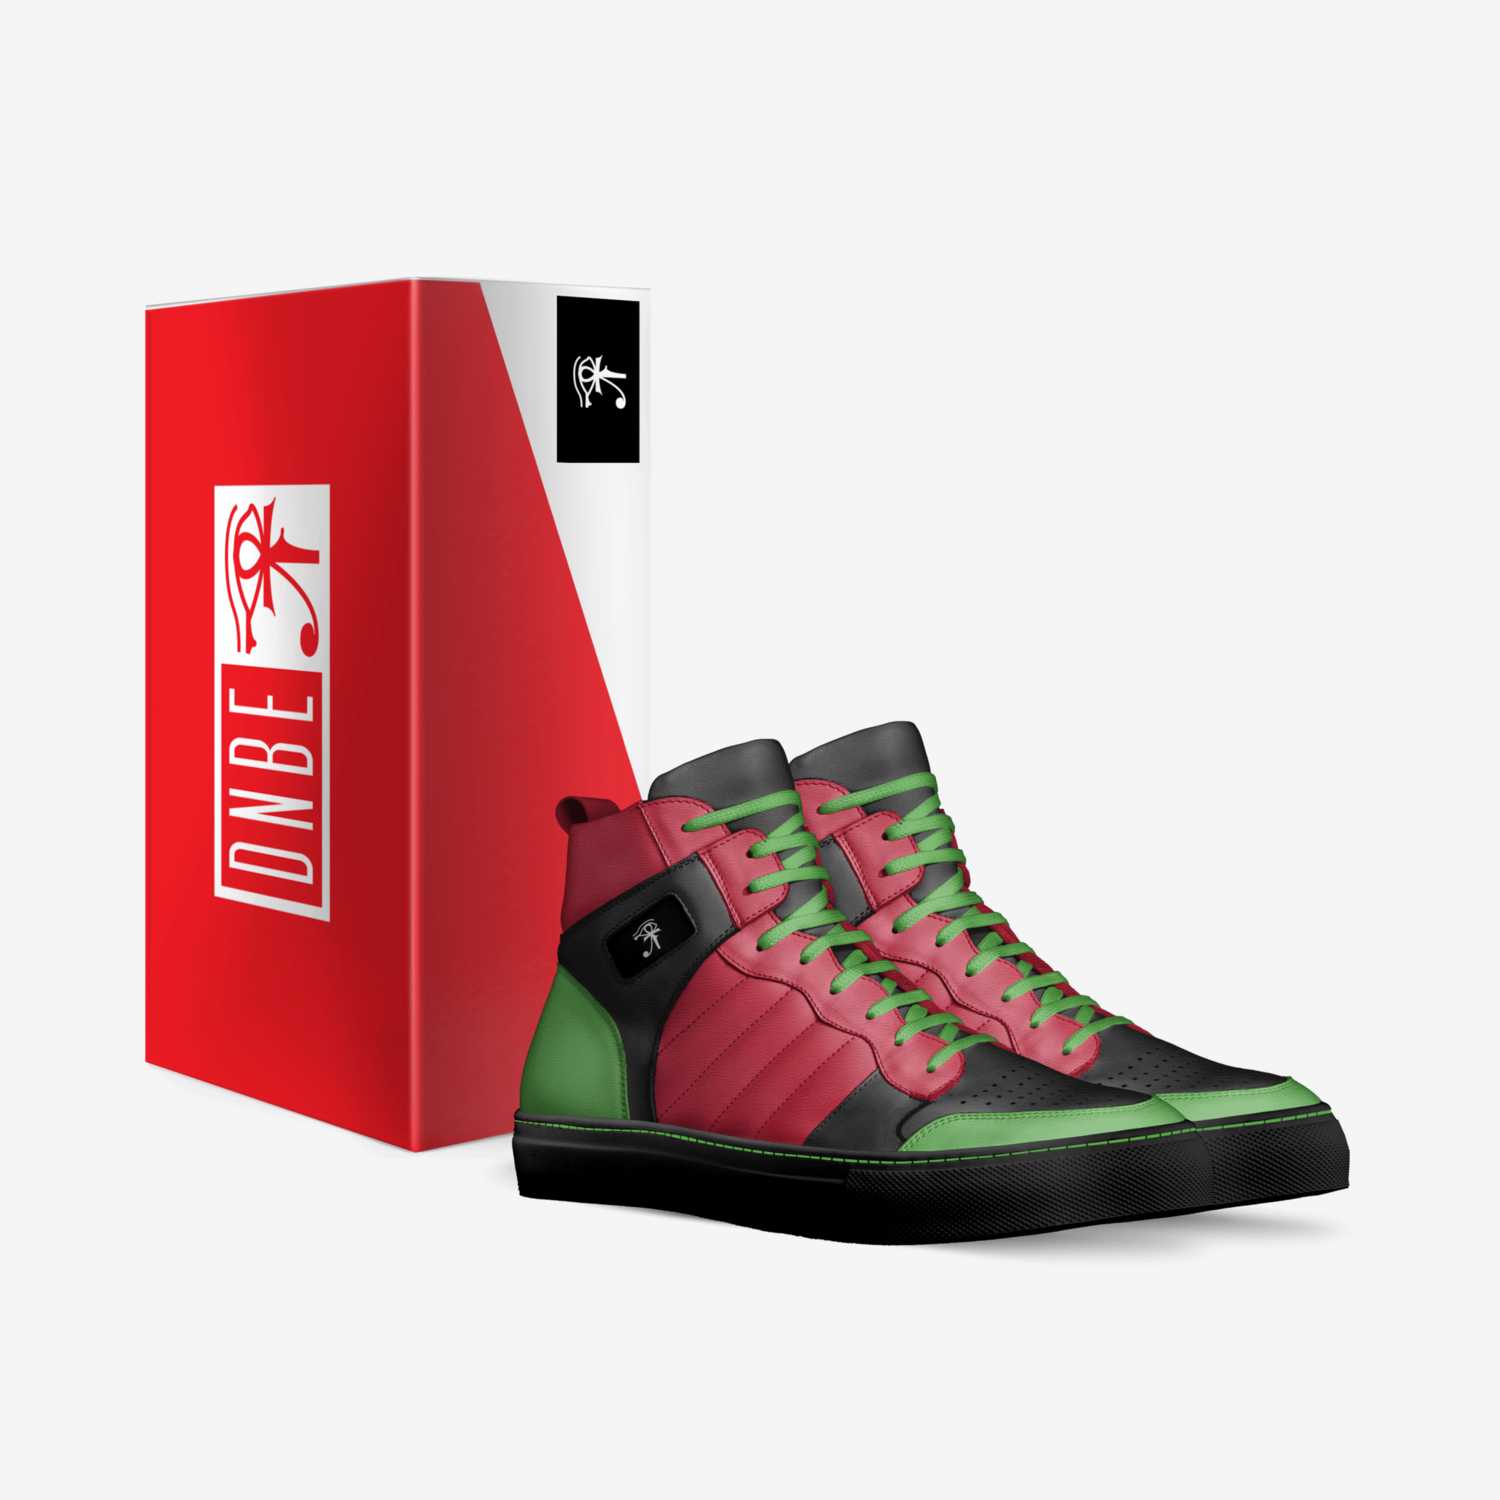 Garvey RBG custom made in Italy shoes by Dnbe Apparel | Box view